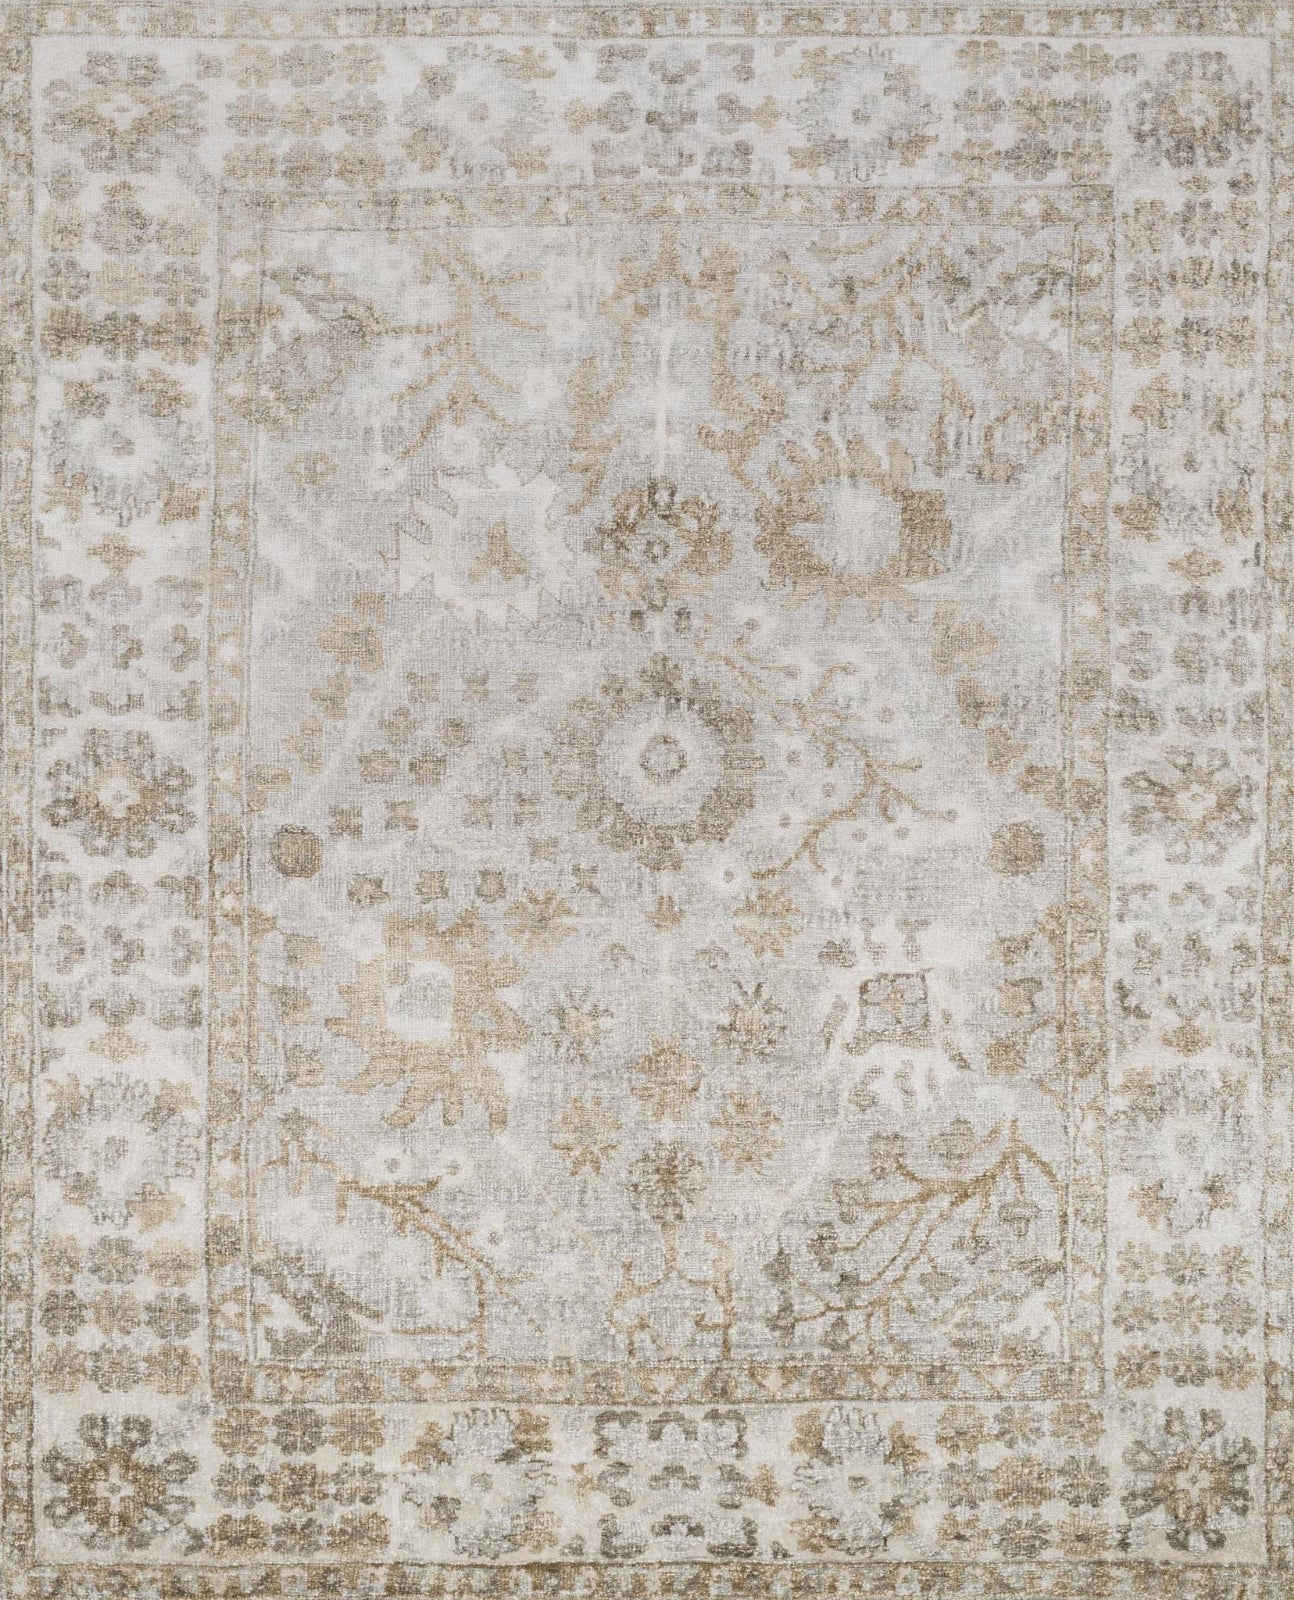 Loloi Imperial IM-02 Silver/Ivory Area Rug main image